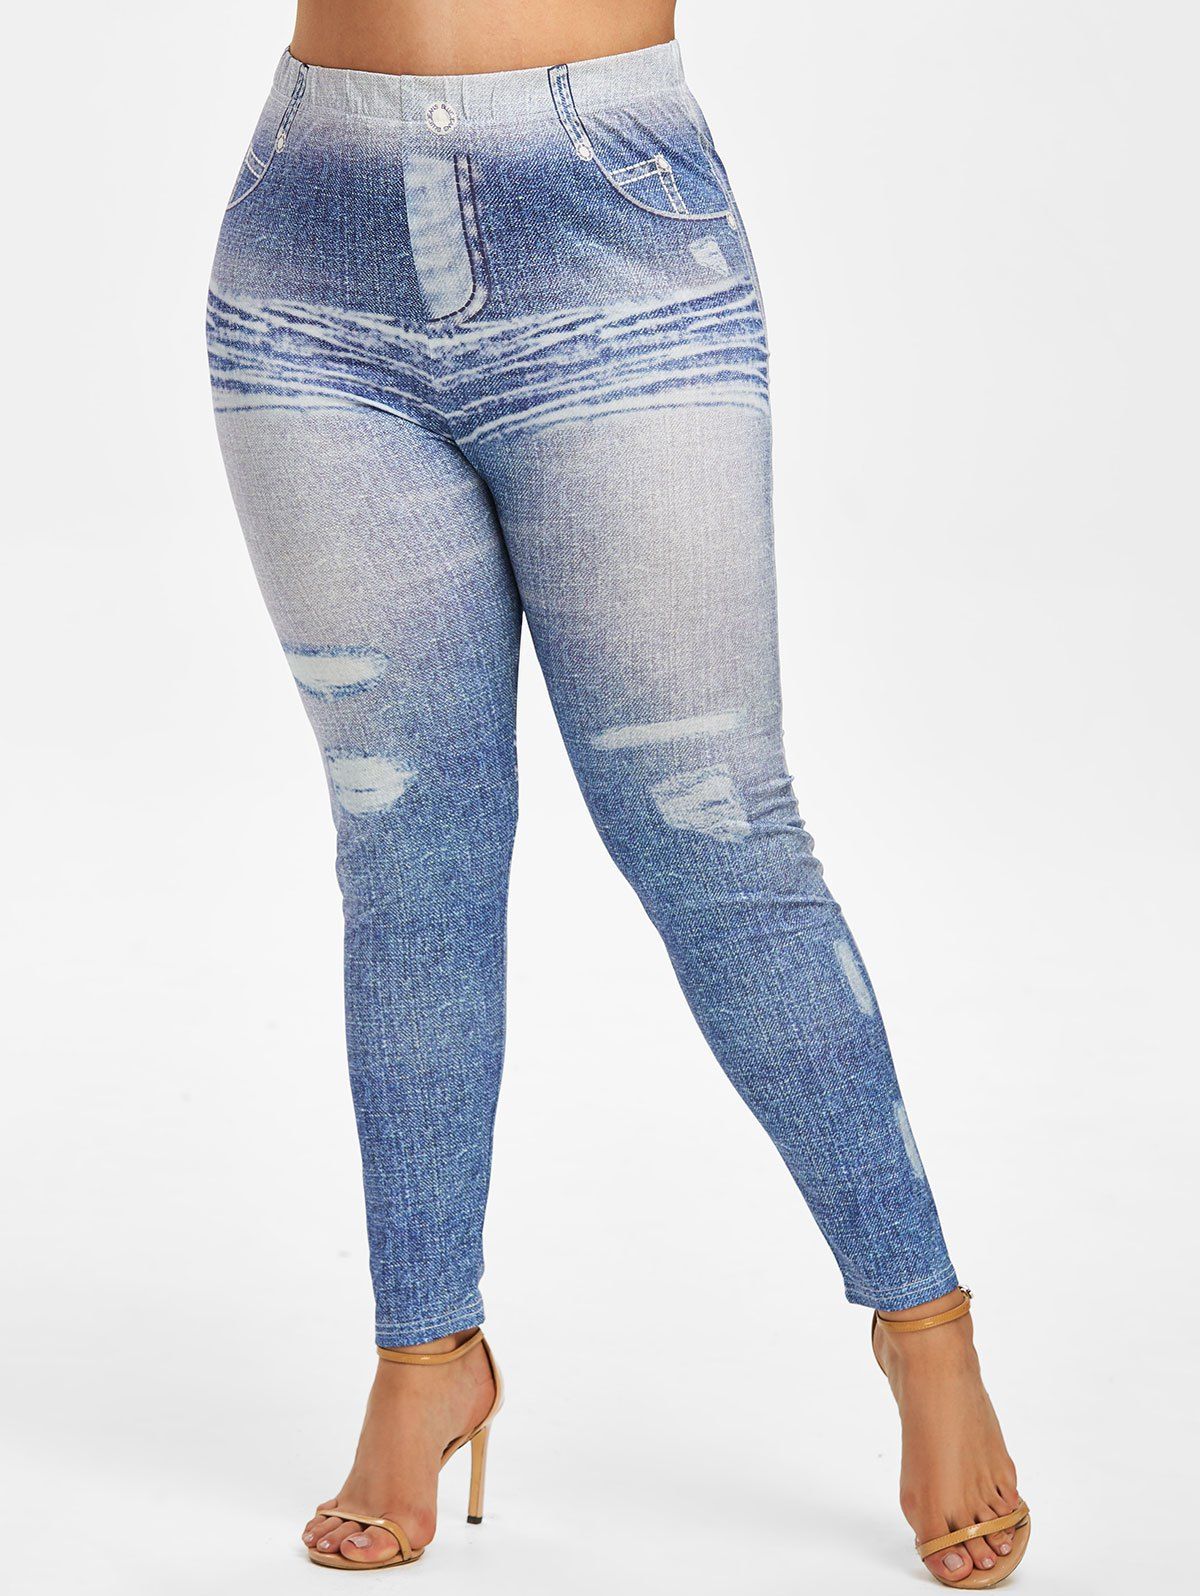 Blue Jean Leggings Plus Size  International Society of Precision  Agriculture